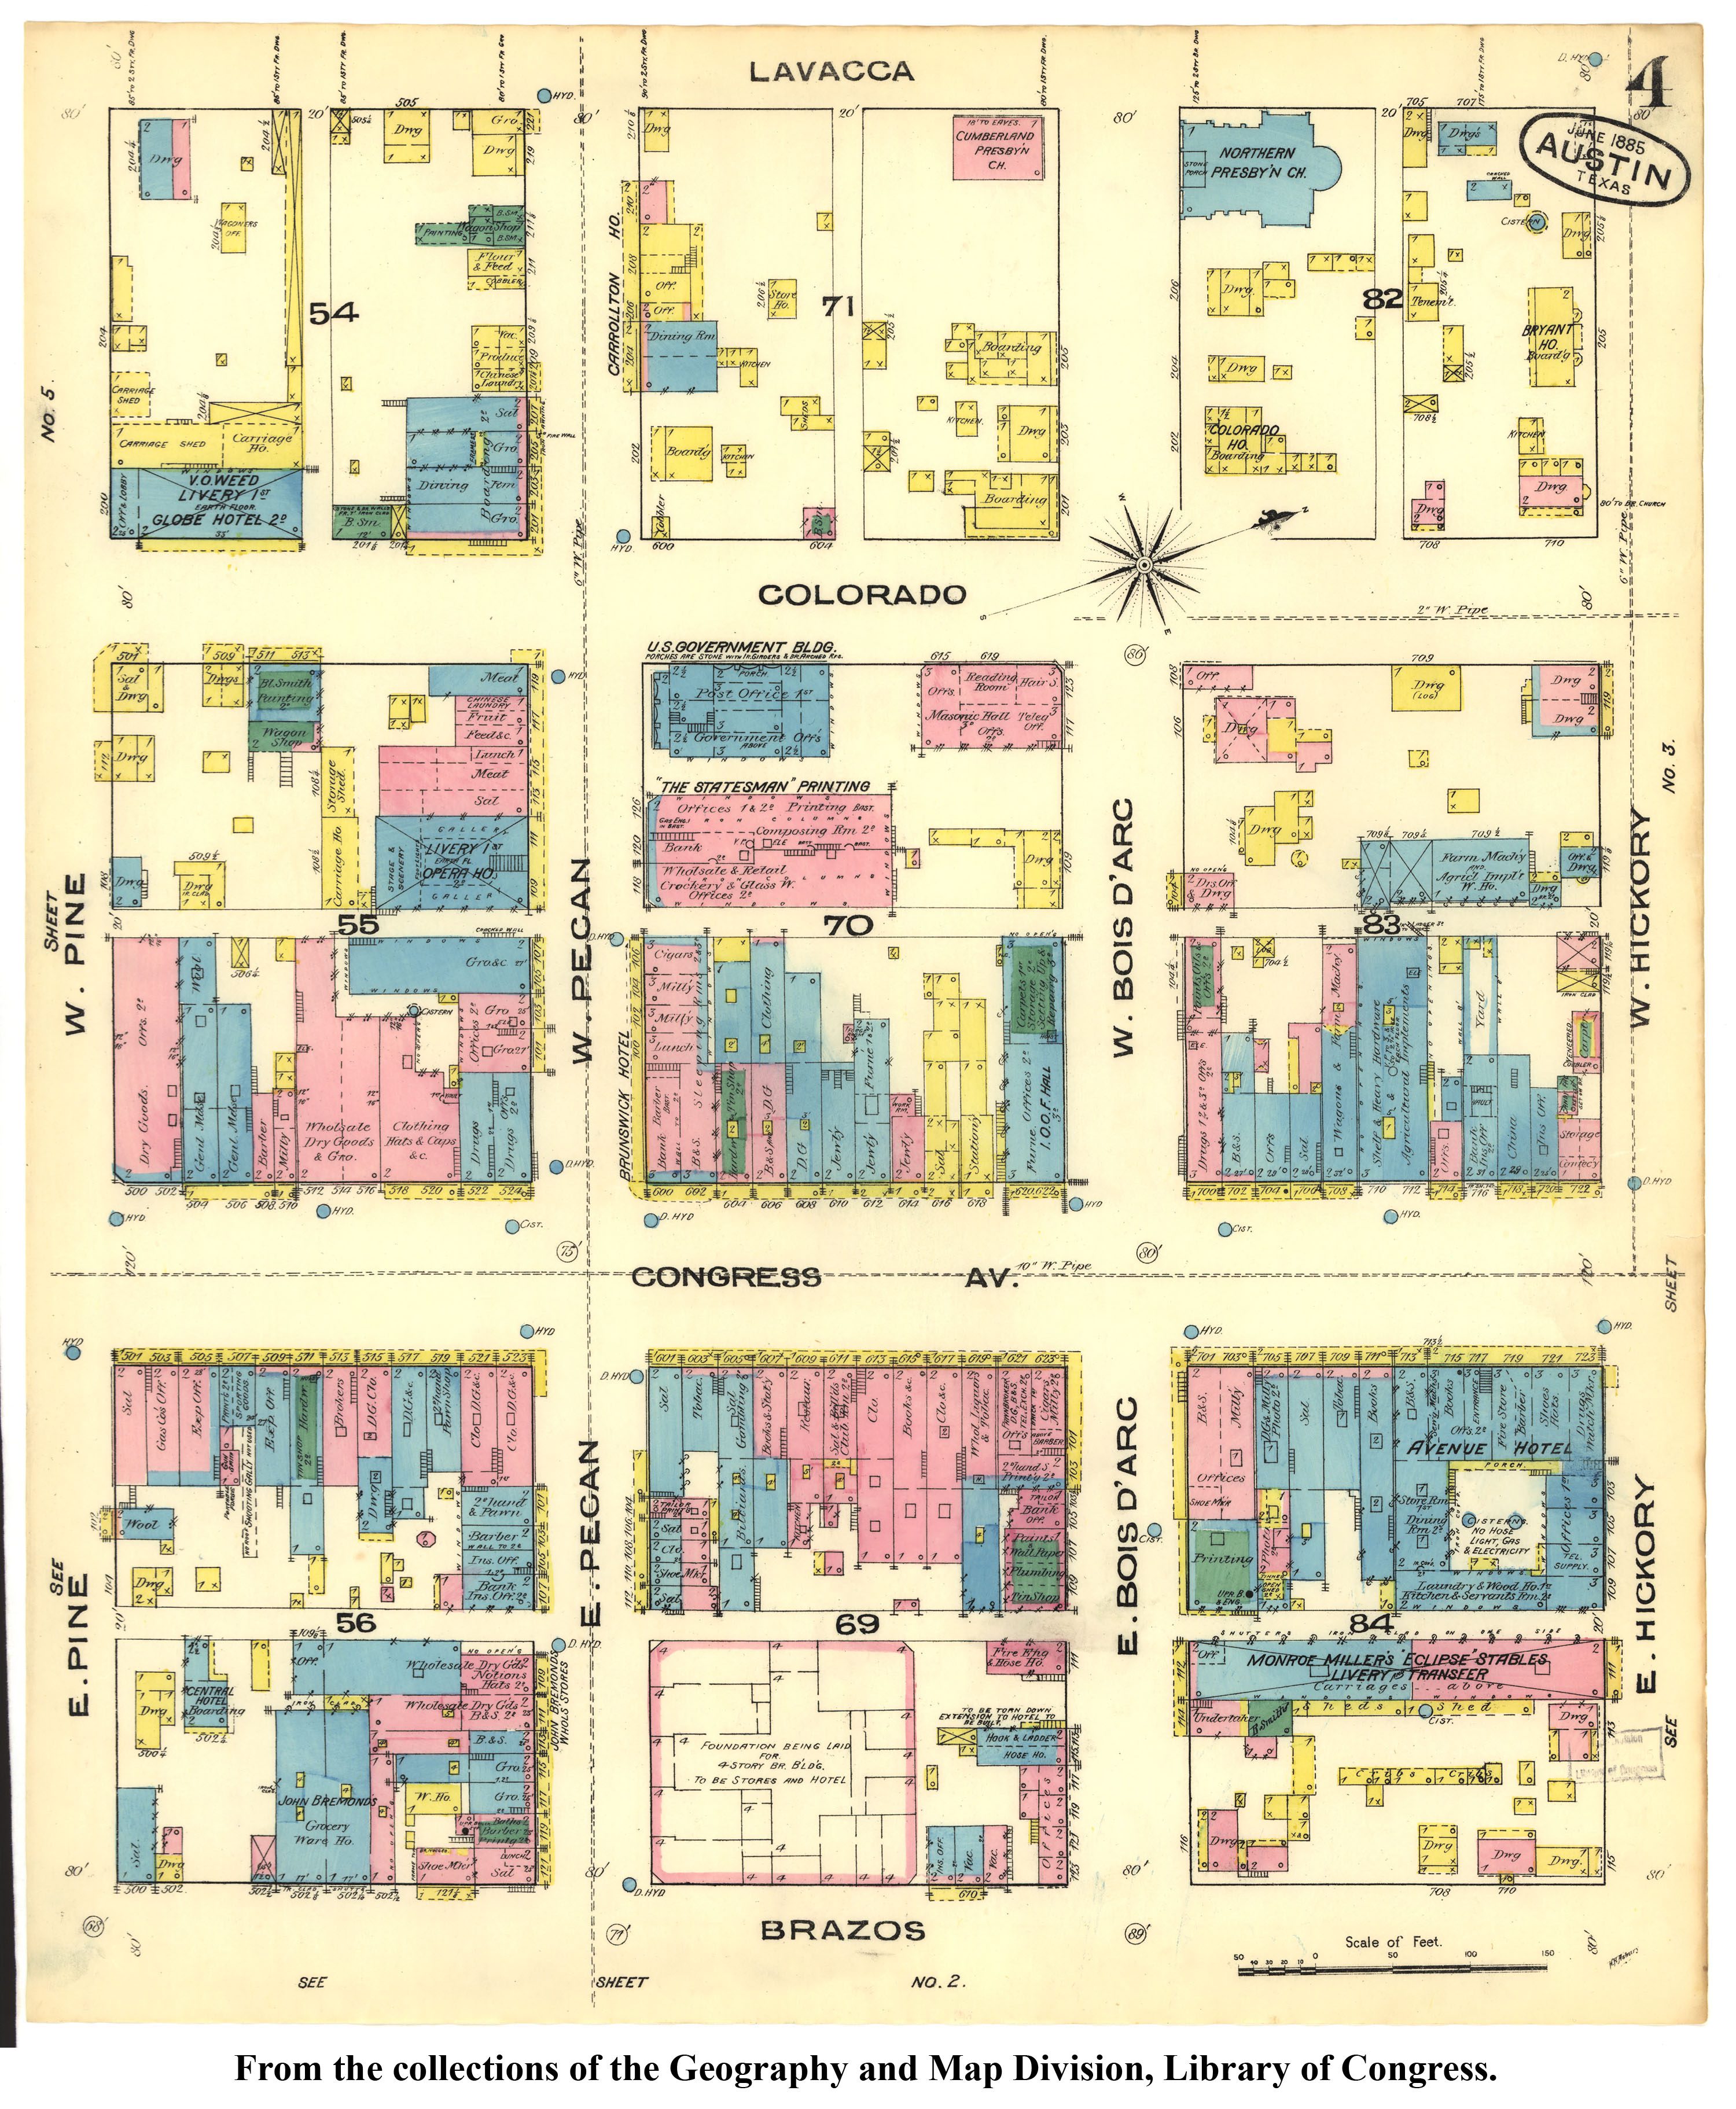 Close-up image of the 1885 Sanborn Maps of Austin showing the blocks around the Avenue Hotel